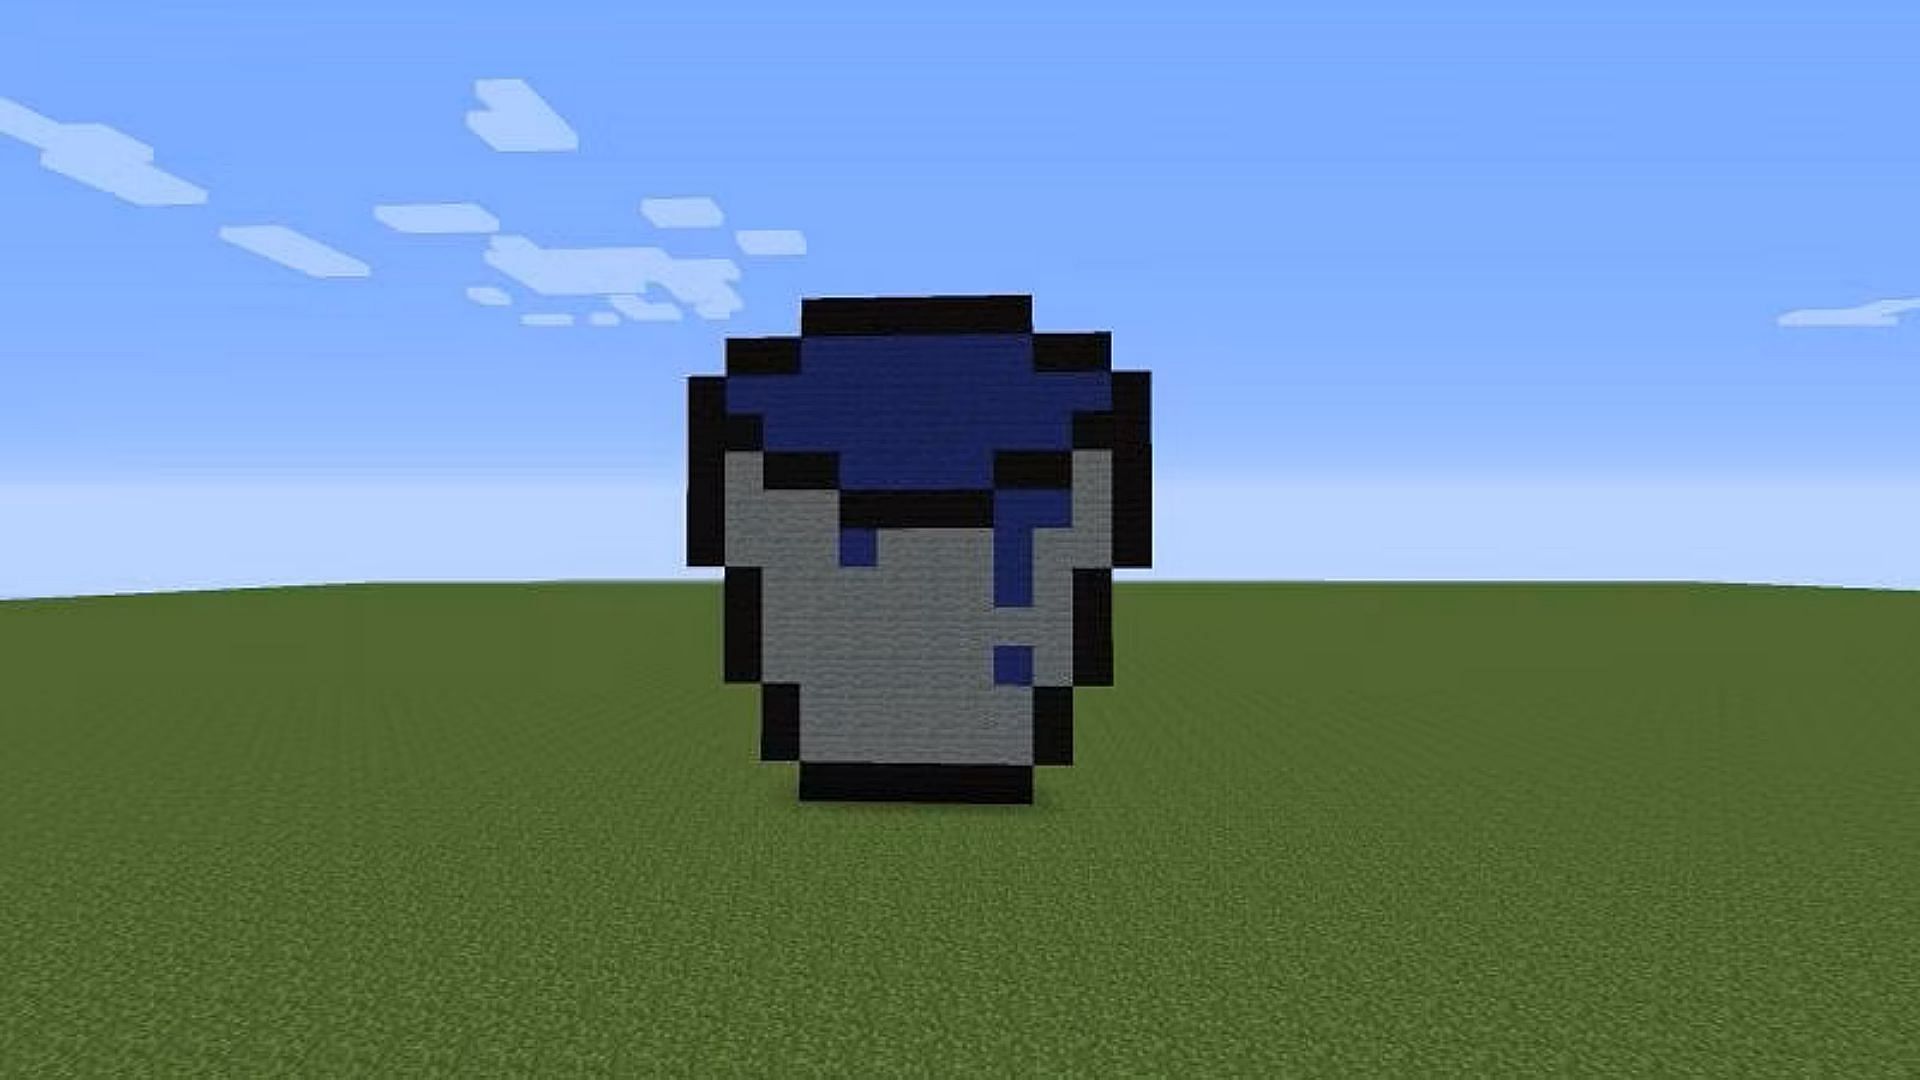 A water bucket MLG in Minecraft can be a lifesaver in many situations (Image via Mojang)